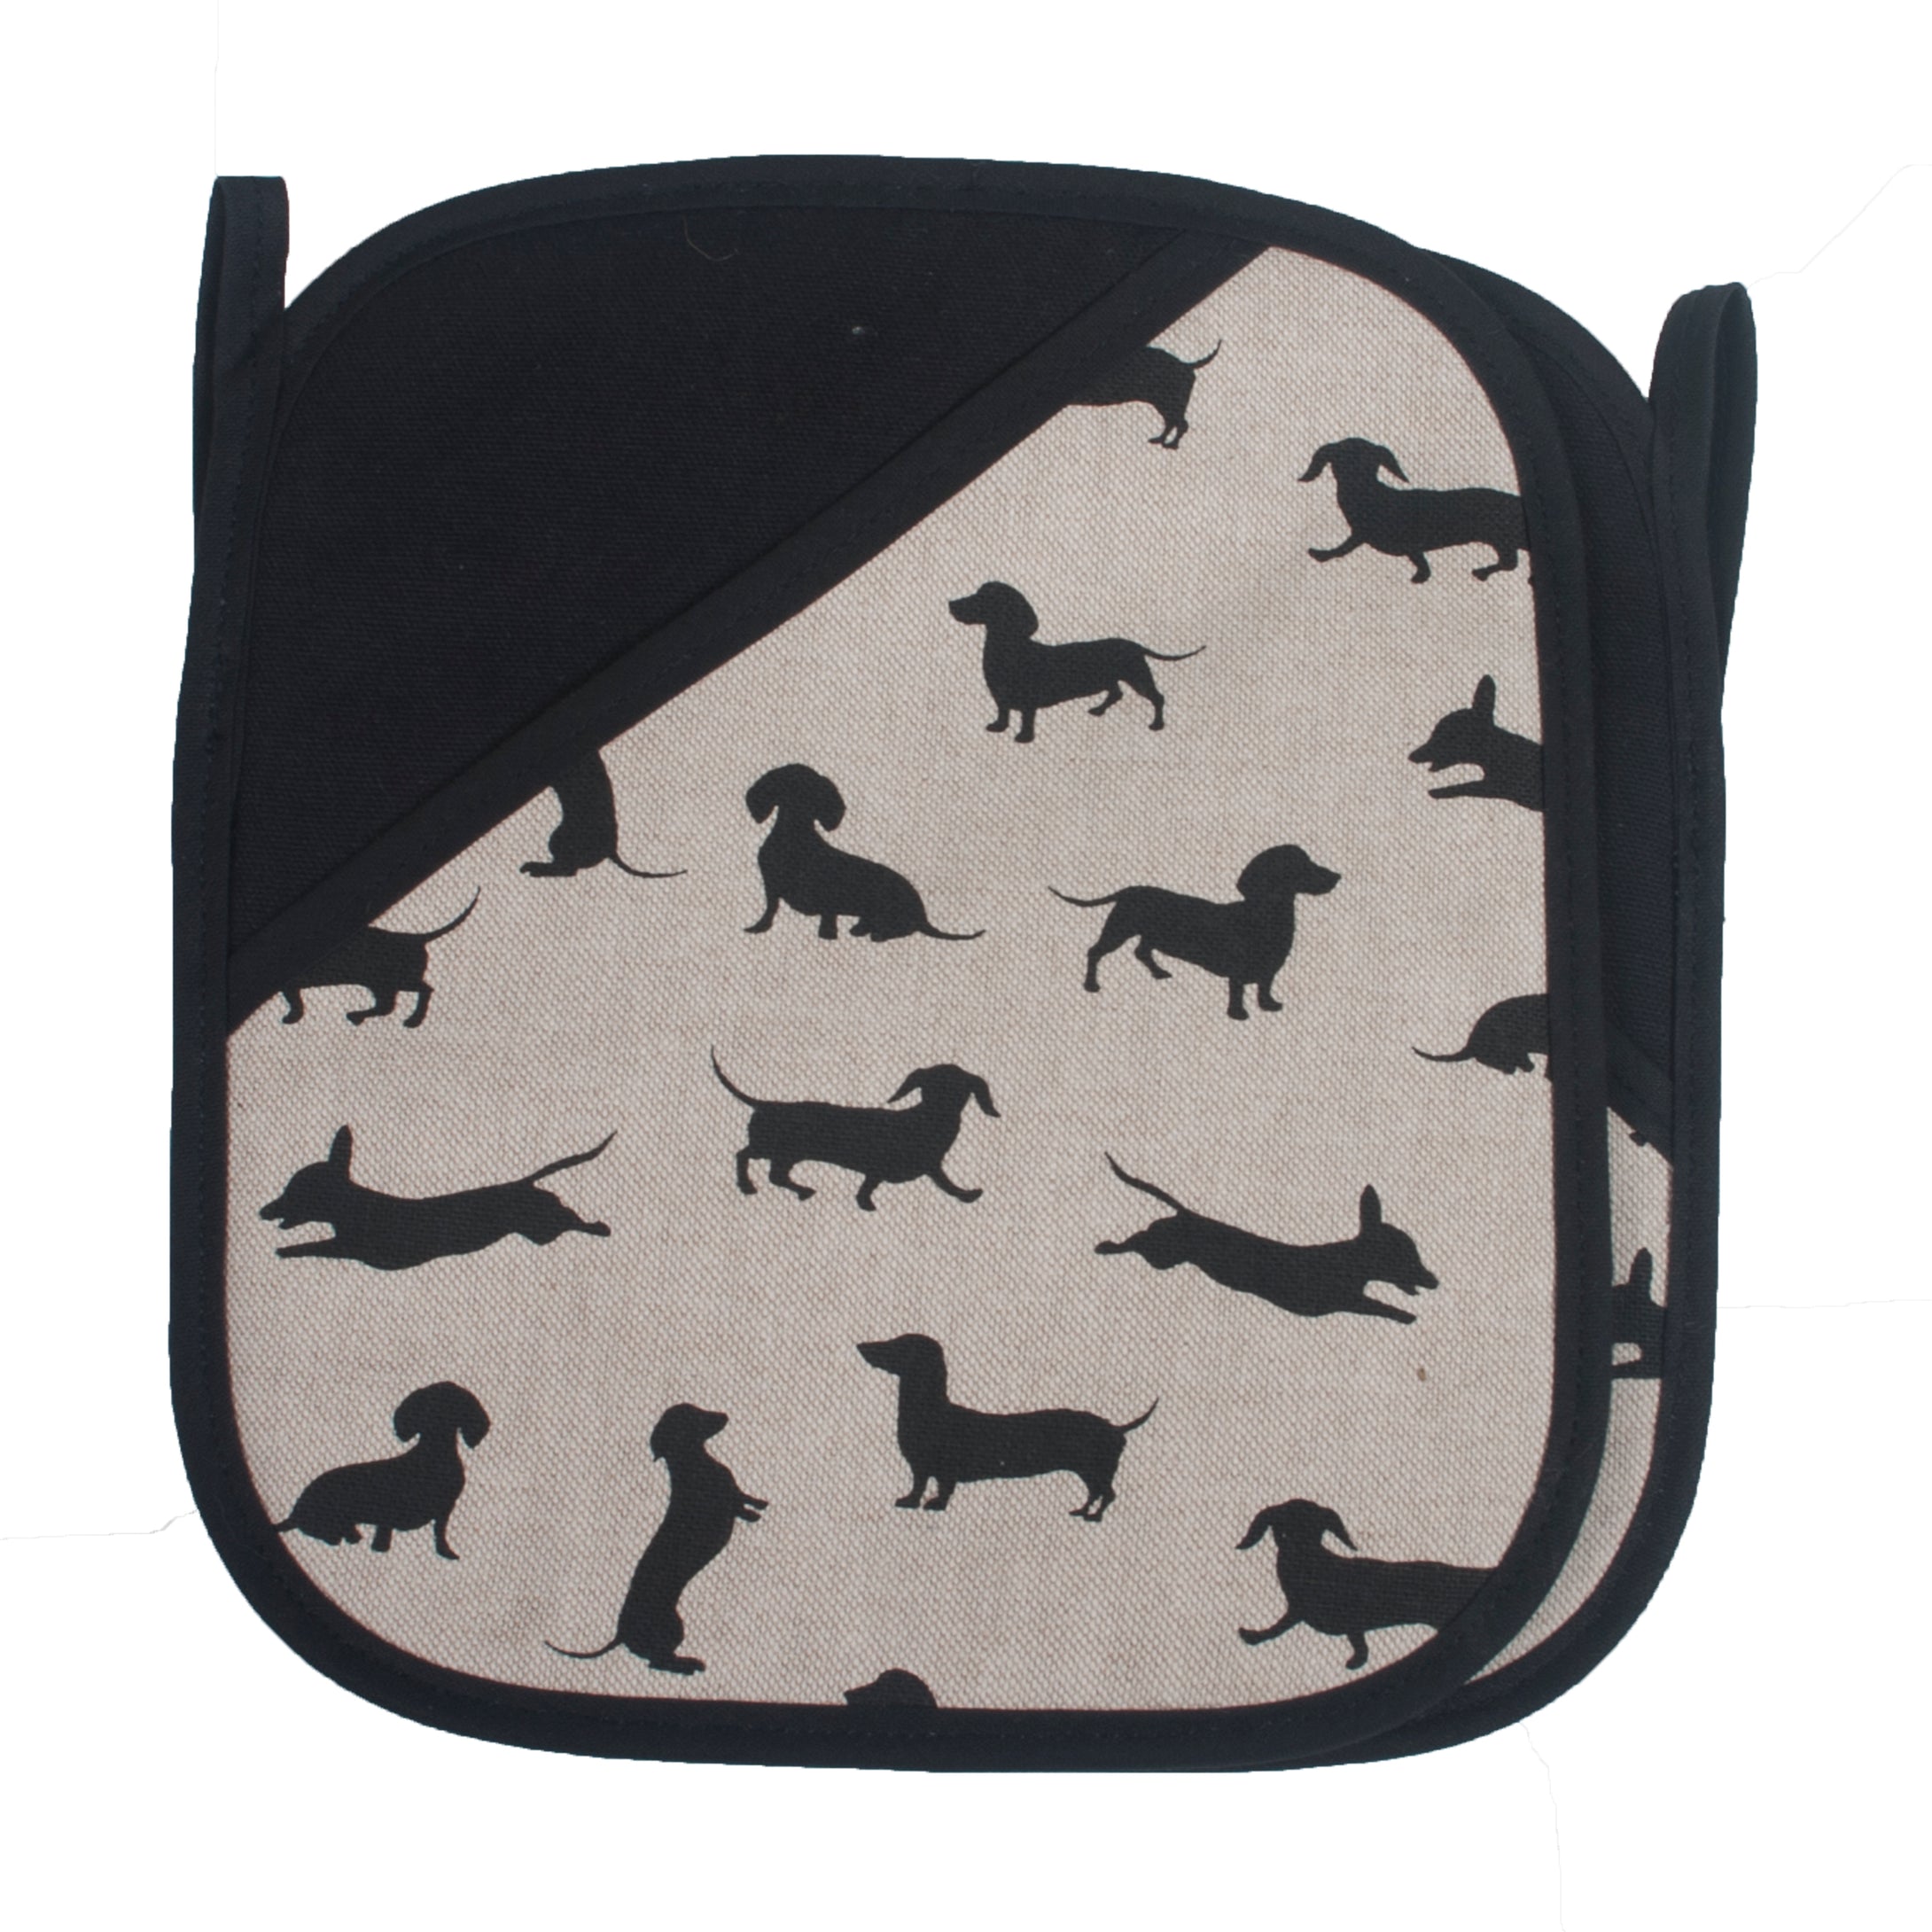 Oven Grippers, Black Dachshund (pair)